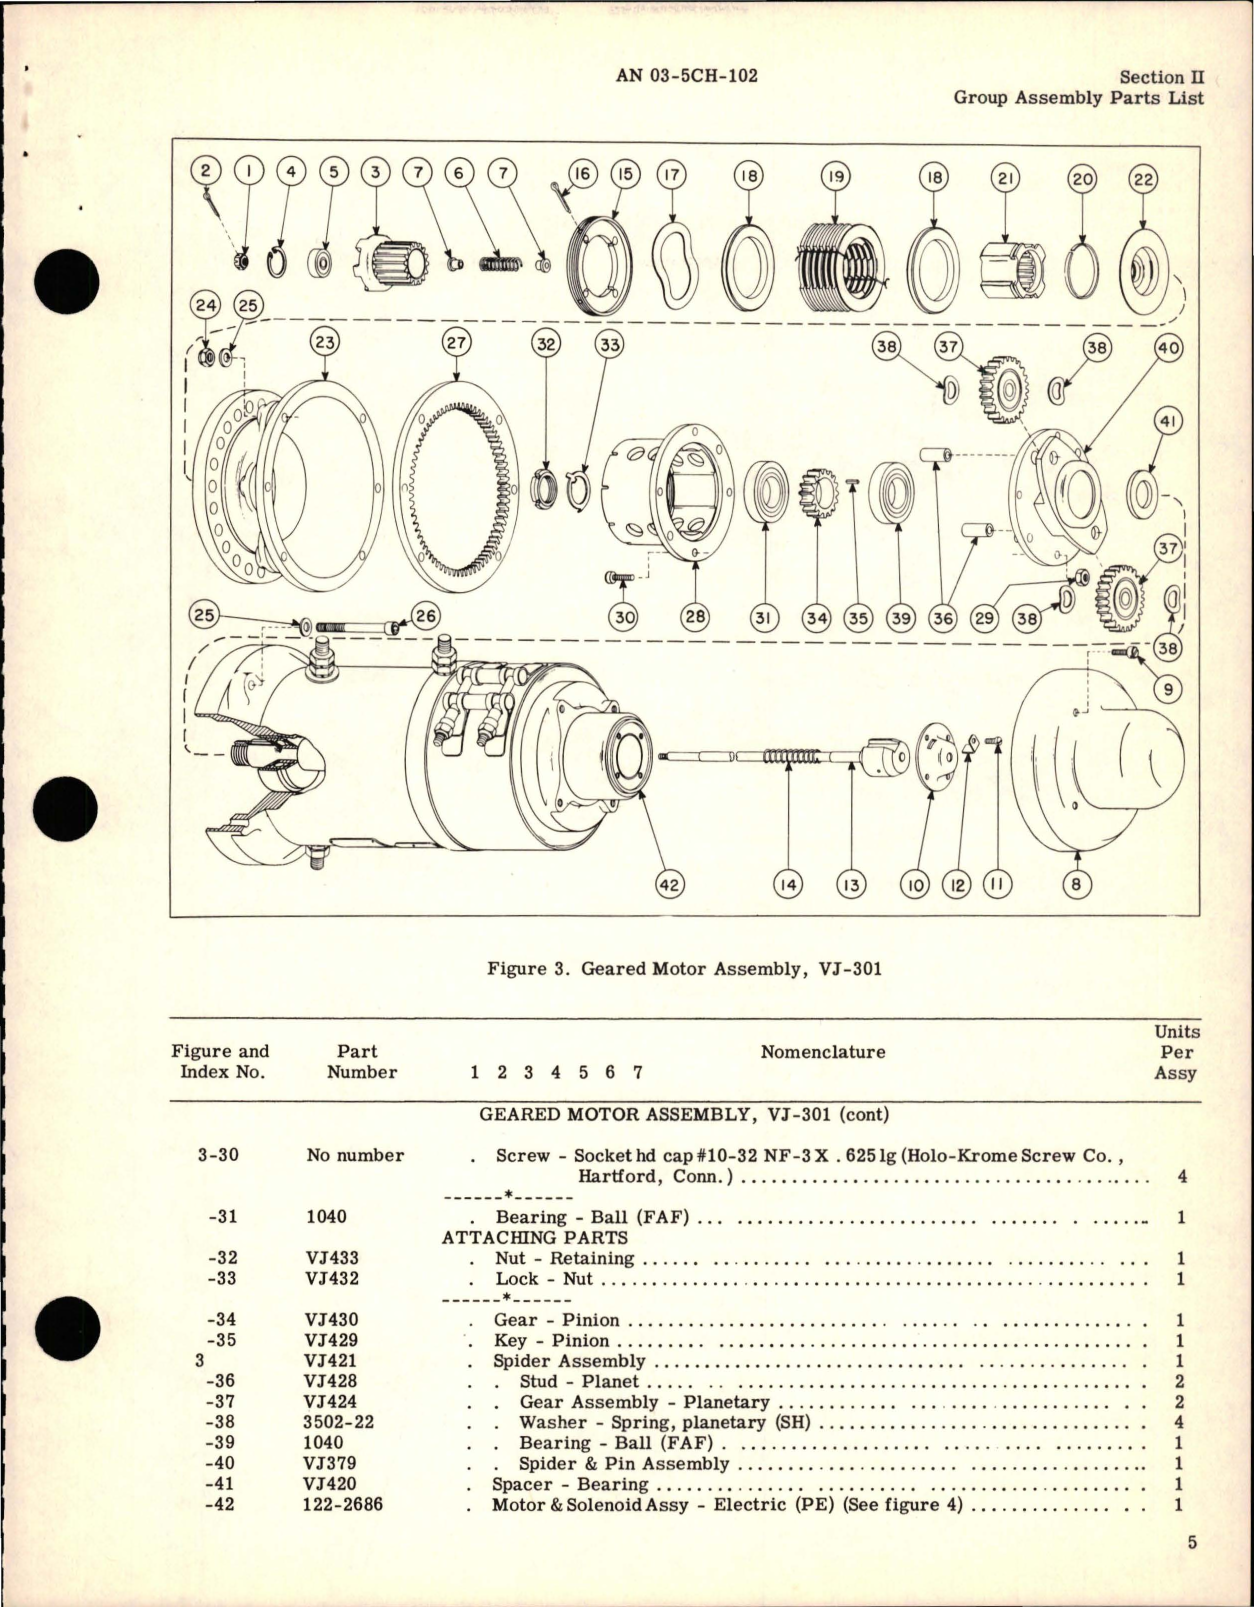 Sample page 7 from AirCorps Library document: Parts Catalog for Main Landing Gear Actuator - Part VJ-550 